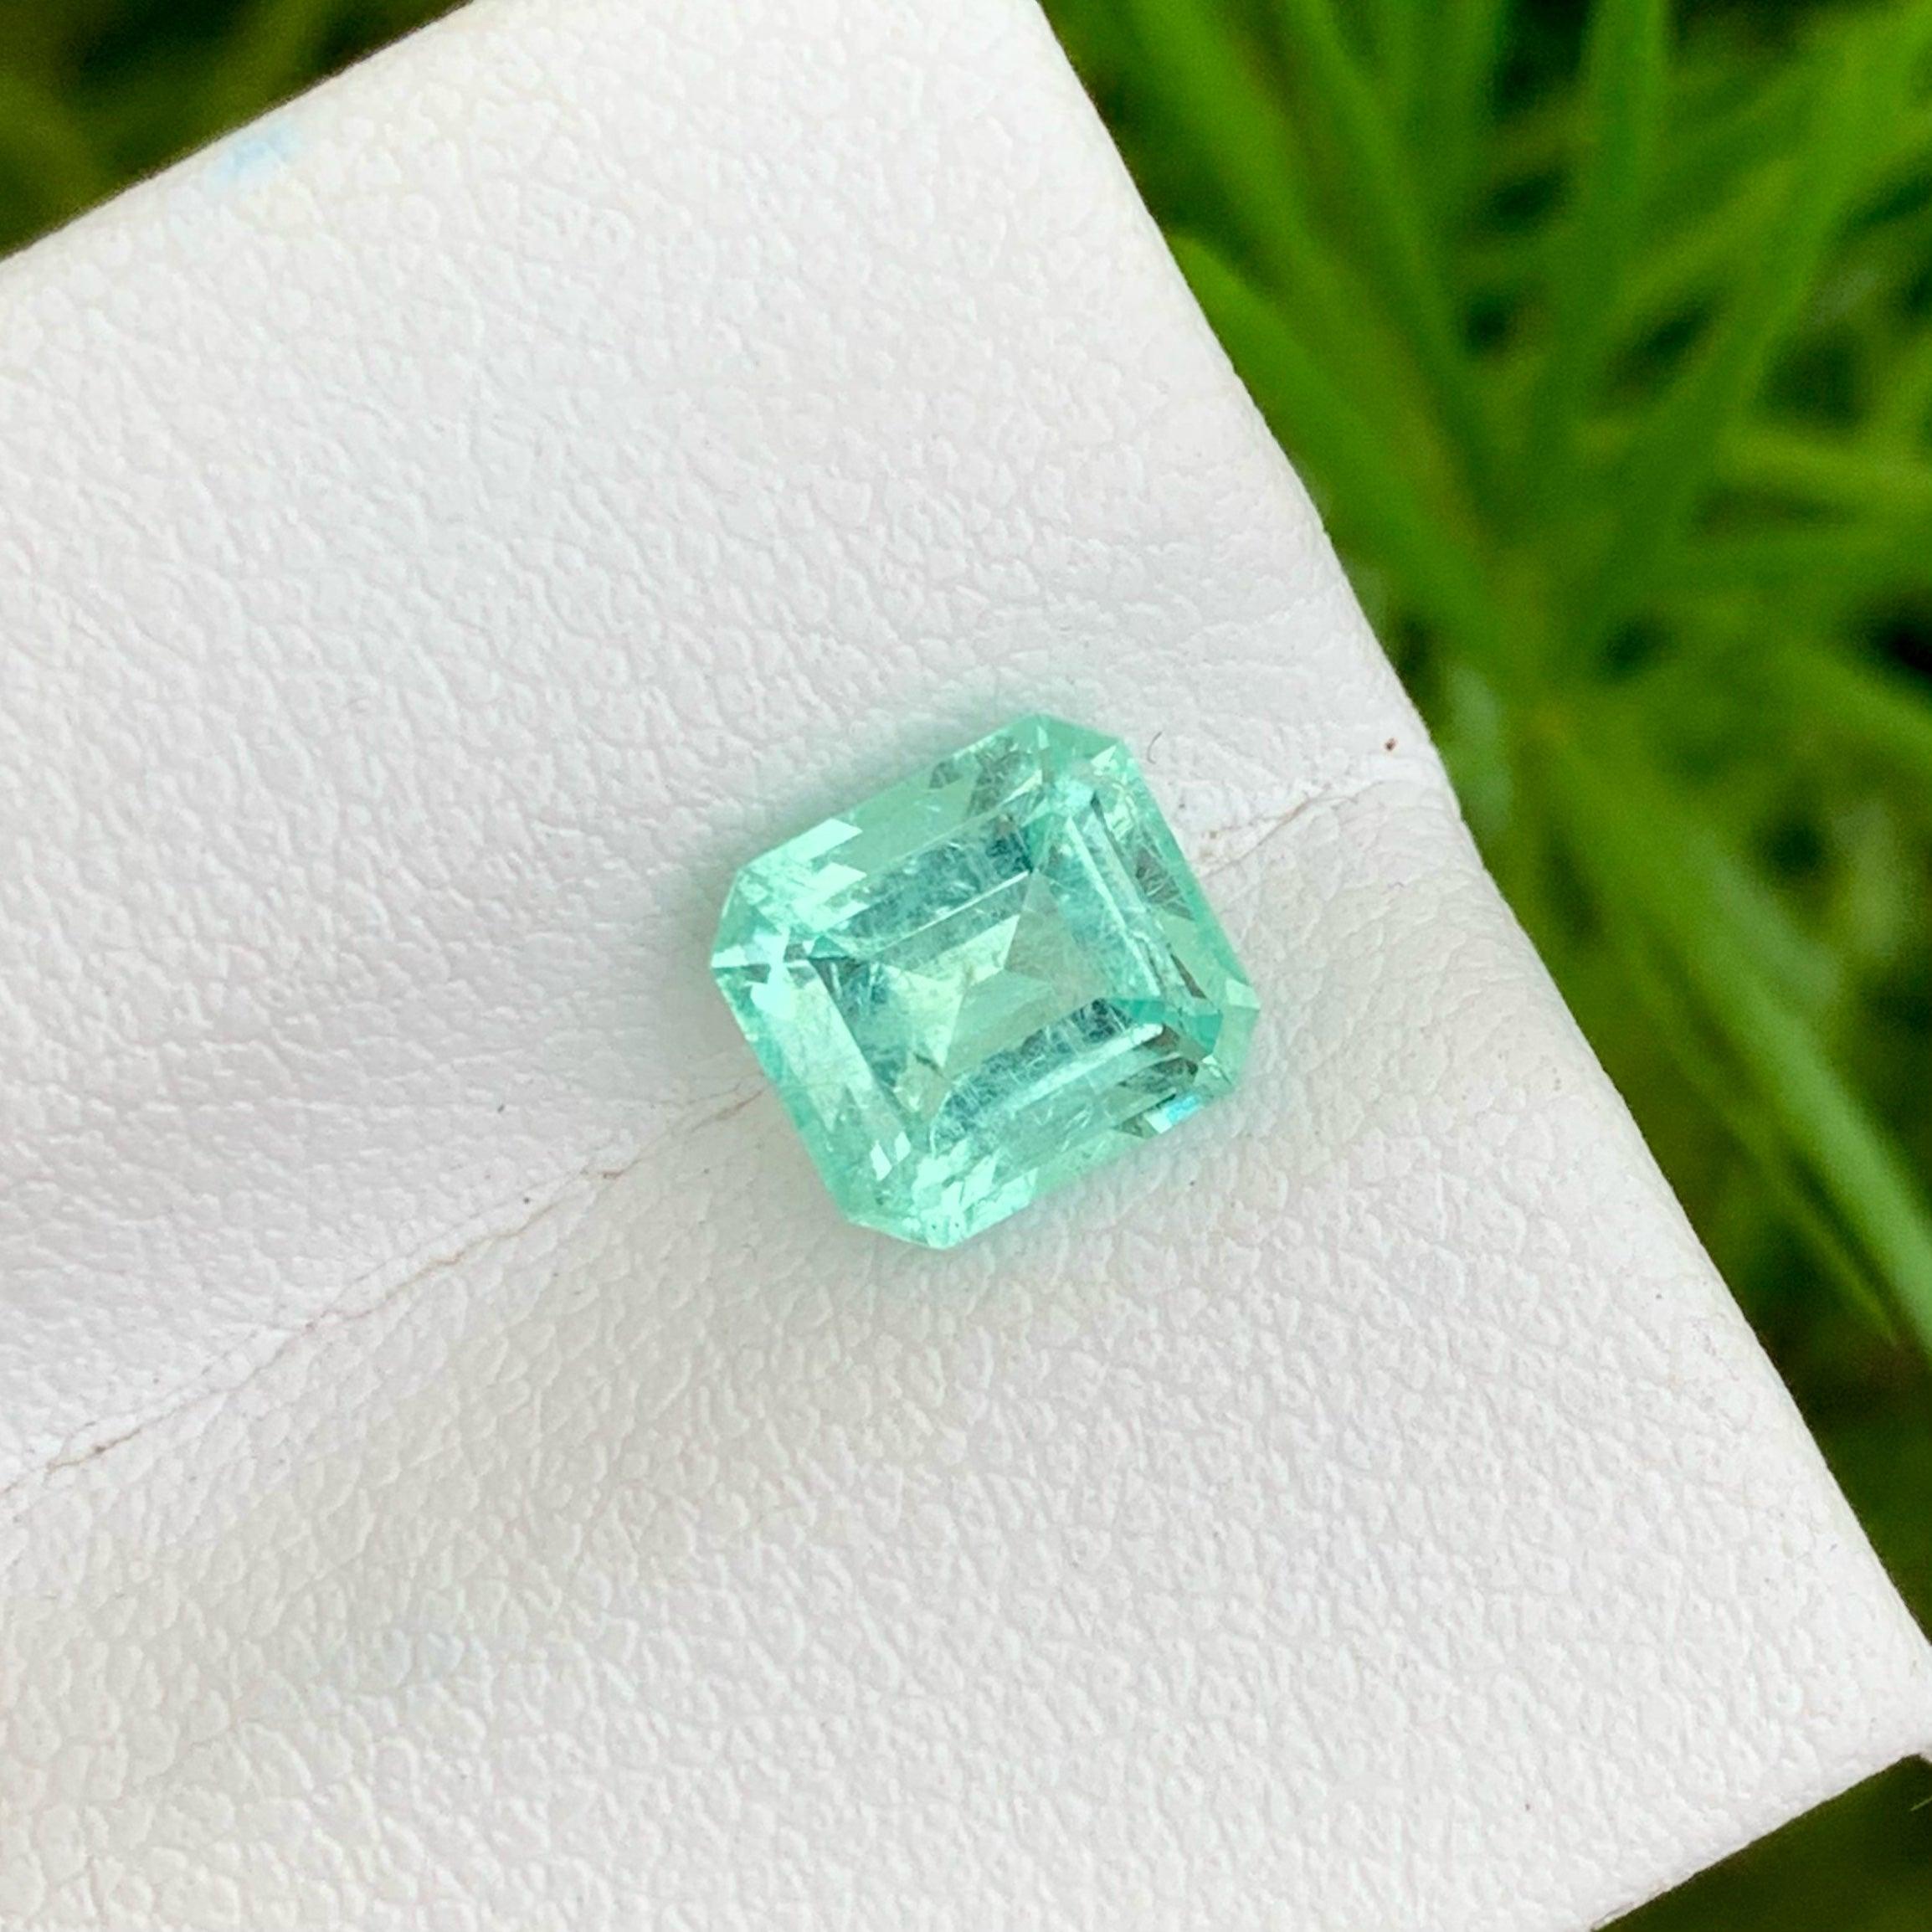 Spectacular Natural Afghan Emerald Gemstone of 1.65 carats from Punjsher,Afghanistan has a wonderful cut in a Octagon shape, incredible Light Green colour. Great brilliance. This gem is Included Clarity.

Product Information: 
GEMSTONE: Spectacular